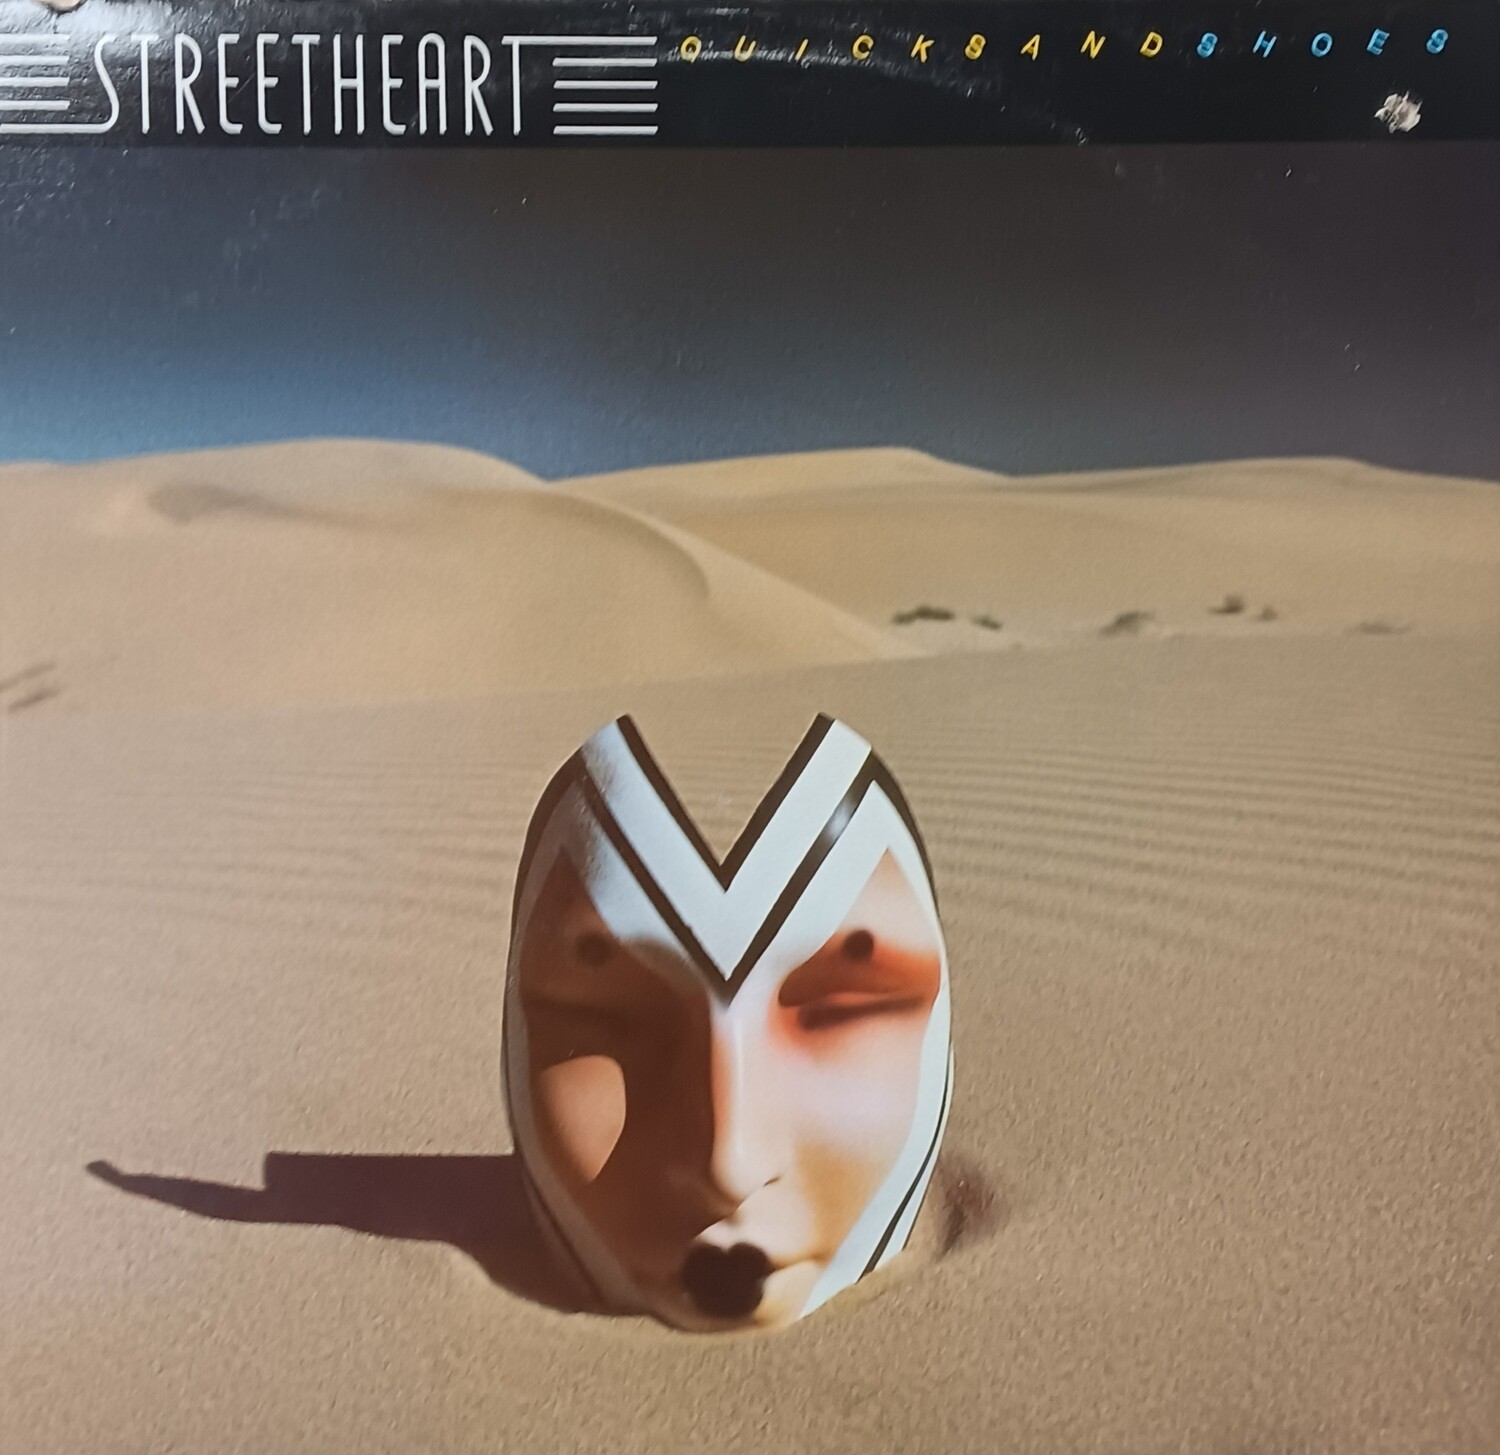 Streetheart - Quicksand Shoes